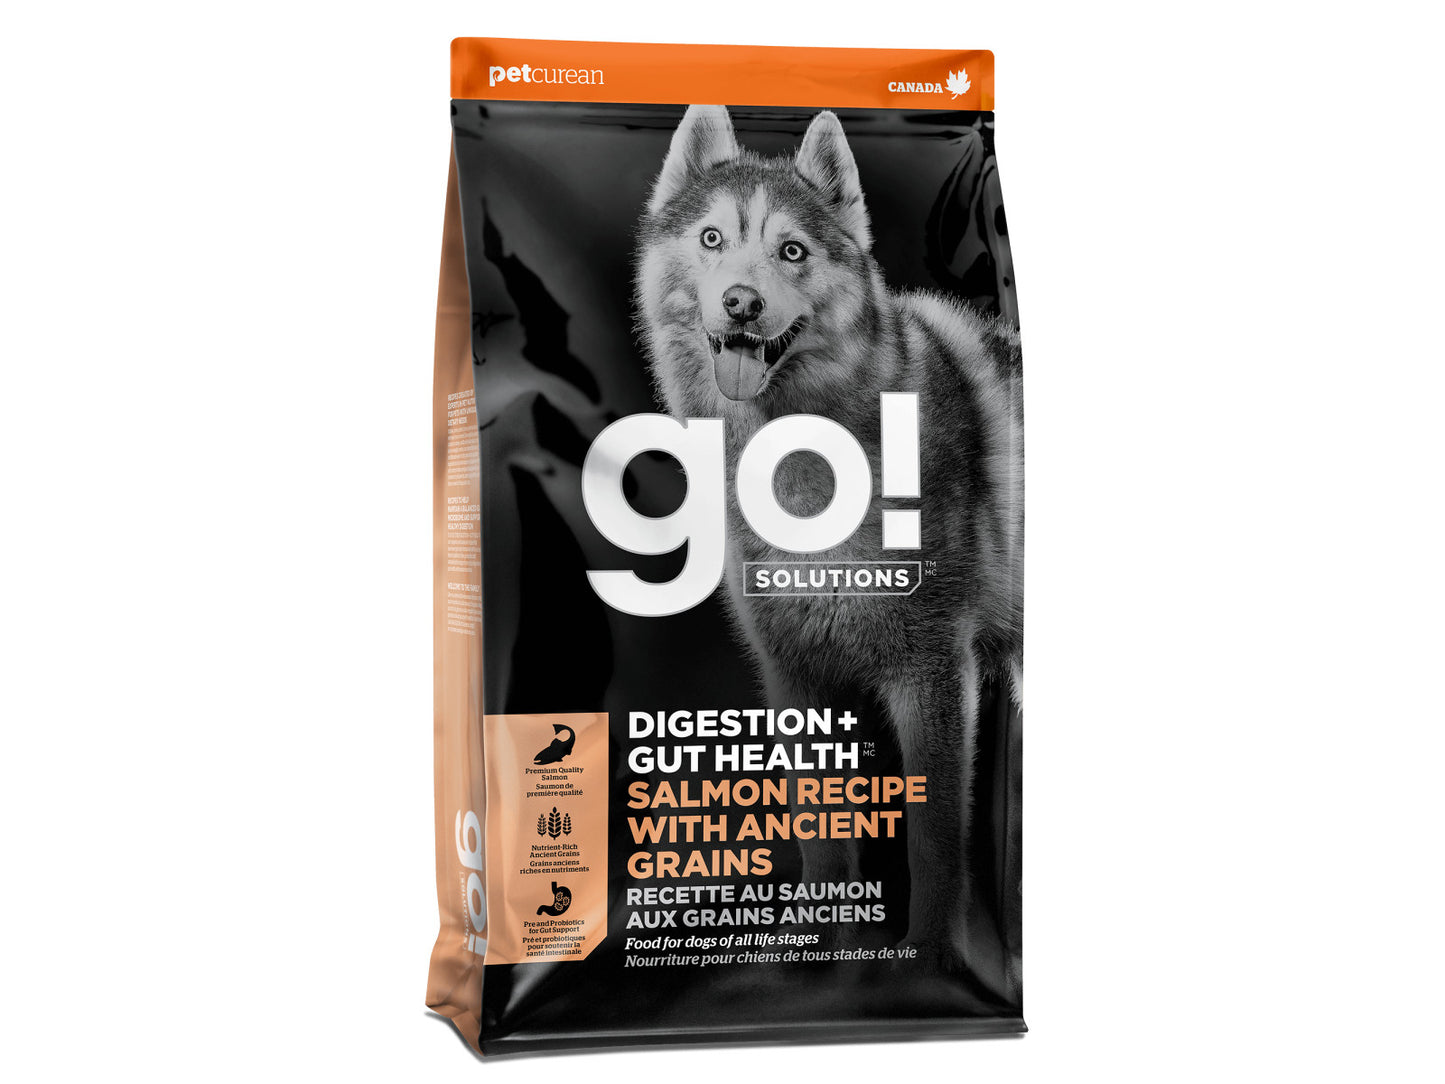 GO! SOLUTIONS DIGESTION + GUT HEALTH  SALMON RECIPE WITH ANCIENT GRAINS FOR DOGS